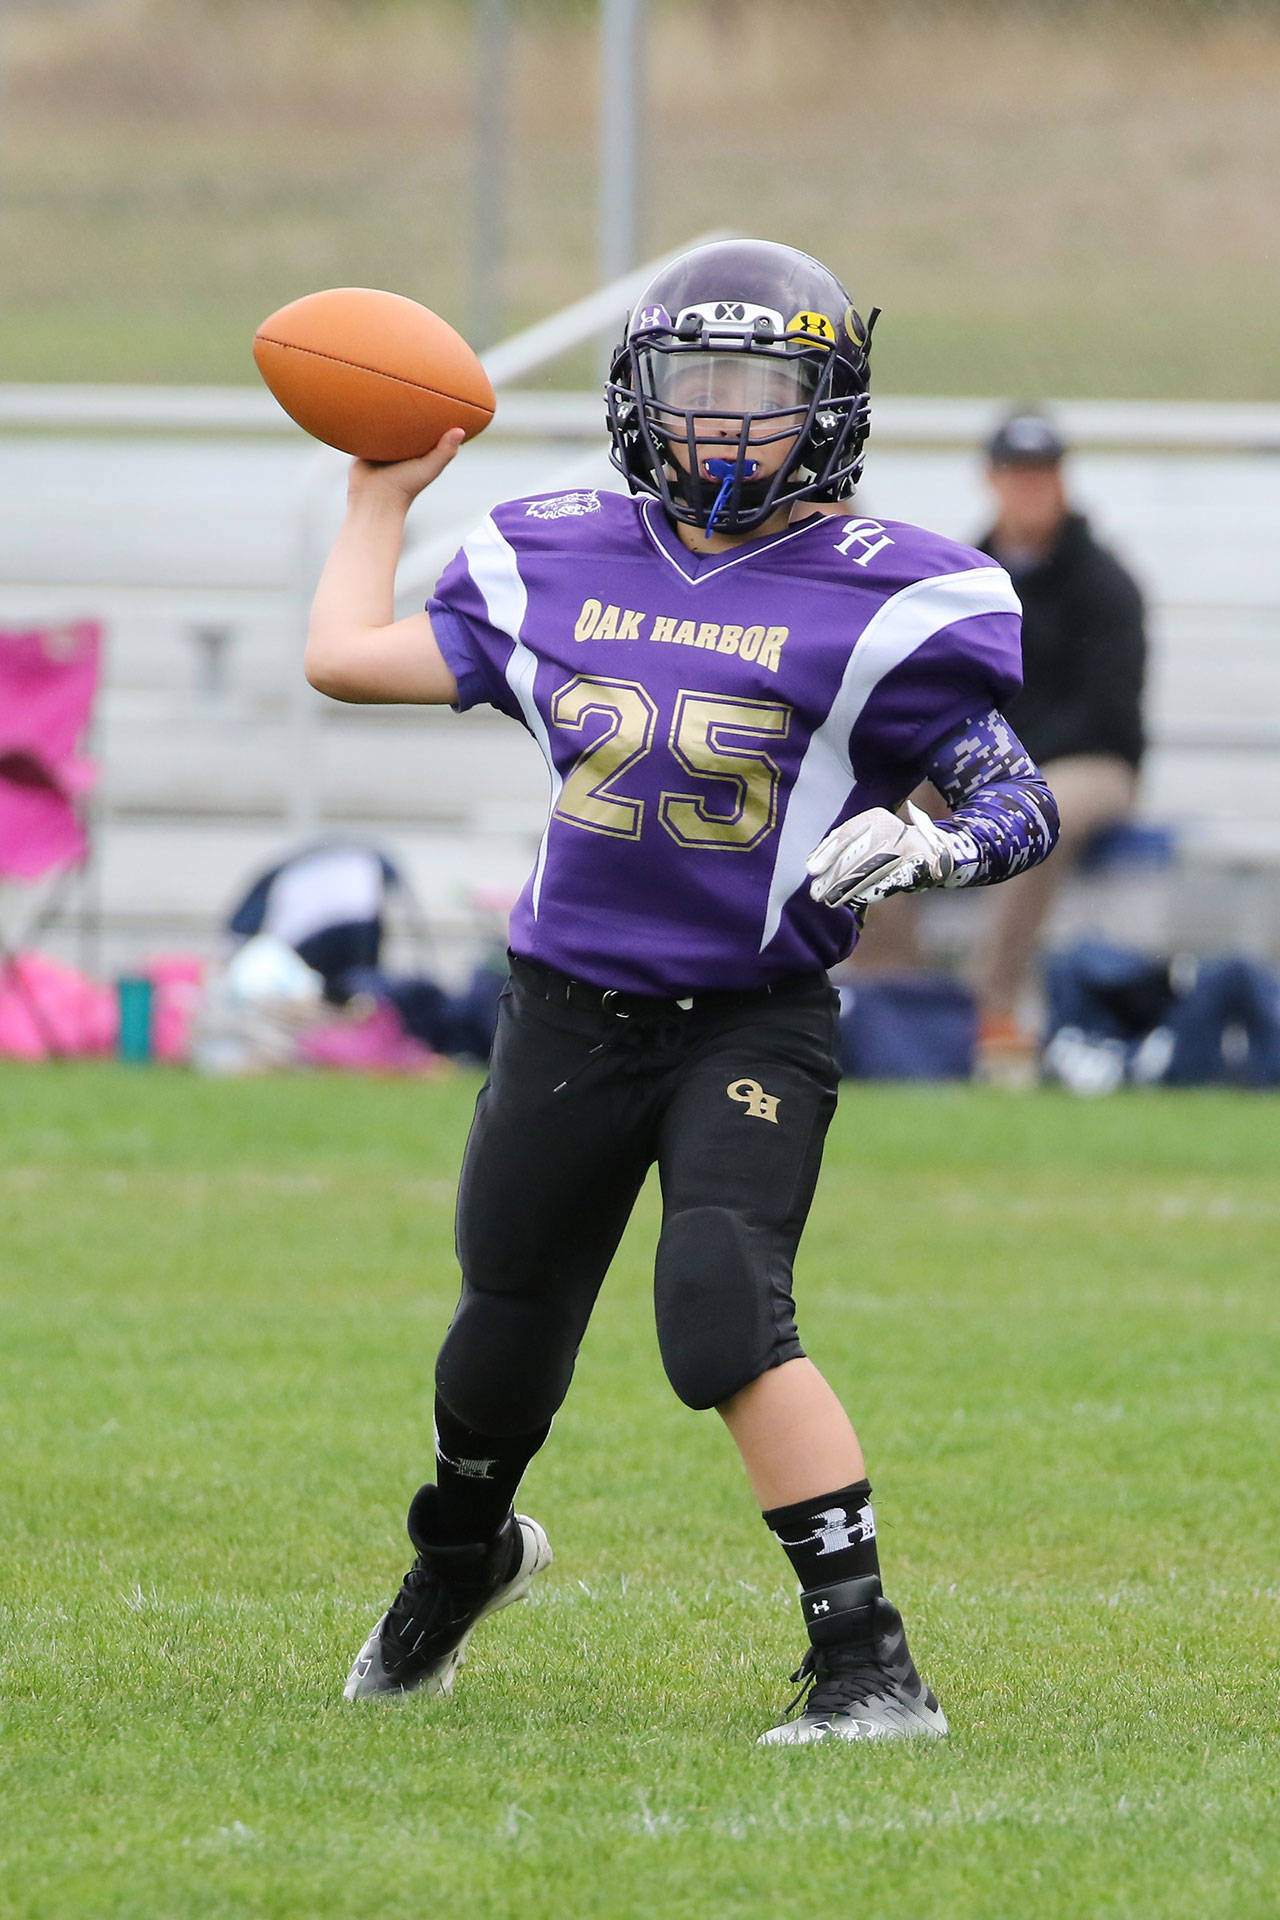 Photos: Oak Harbor teams compete at Fort Nugent / Youth football